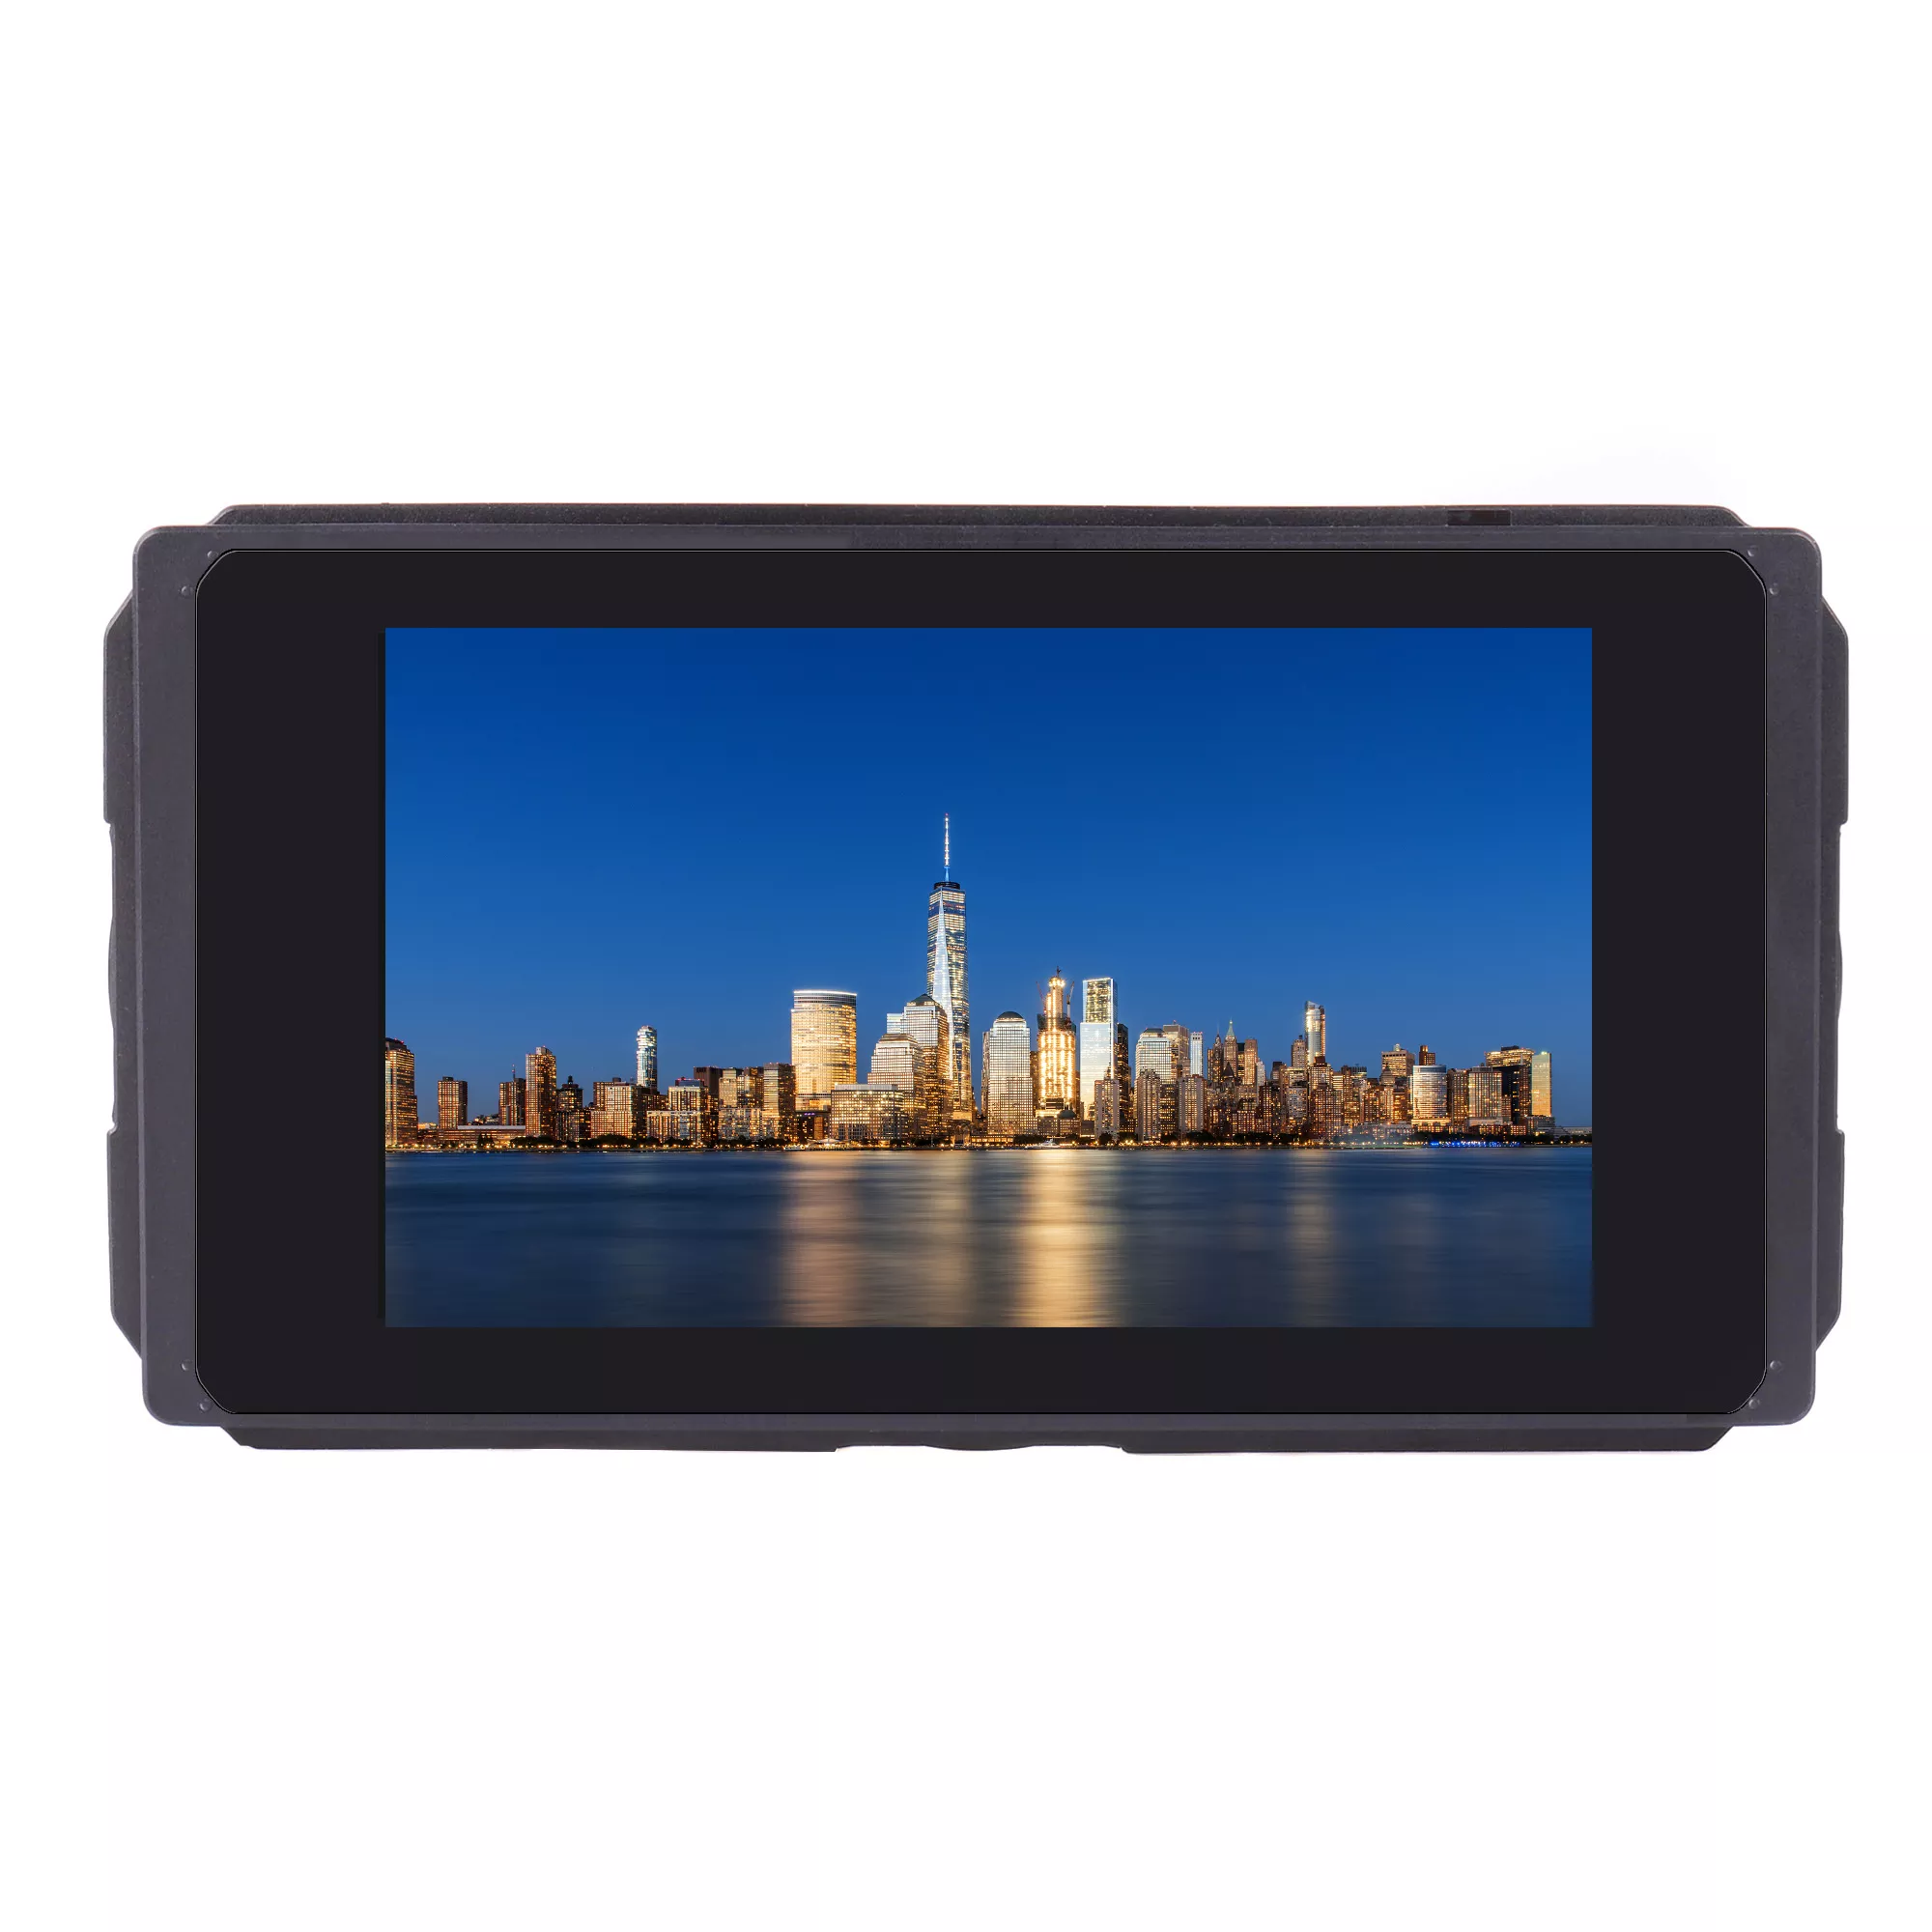 Fotga C50 4K On-Camera Field Monitor 5 inch 2000nits IPS Touch Screen with USB HDMI 3D LUT Upgrade for DSLR Camcorder